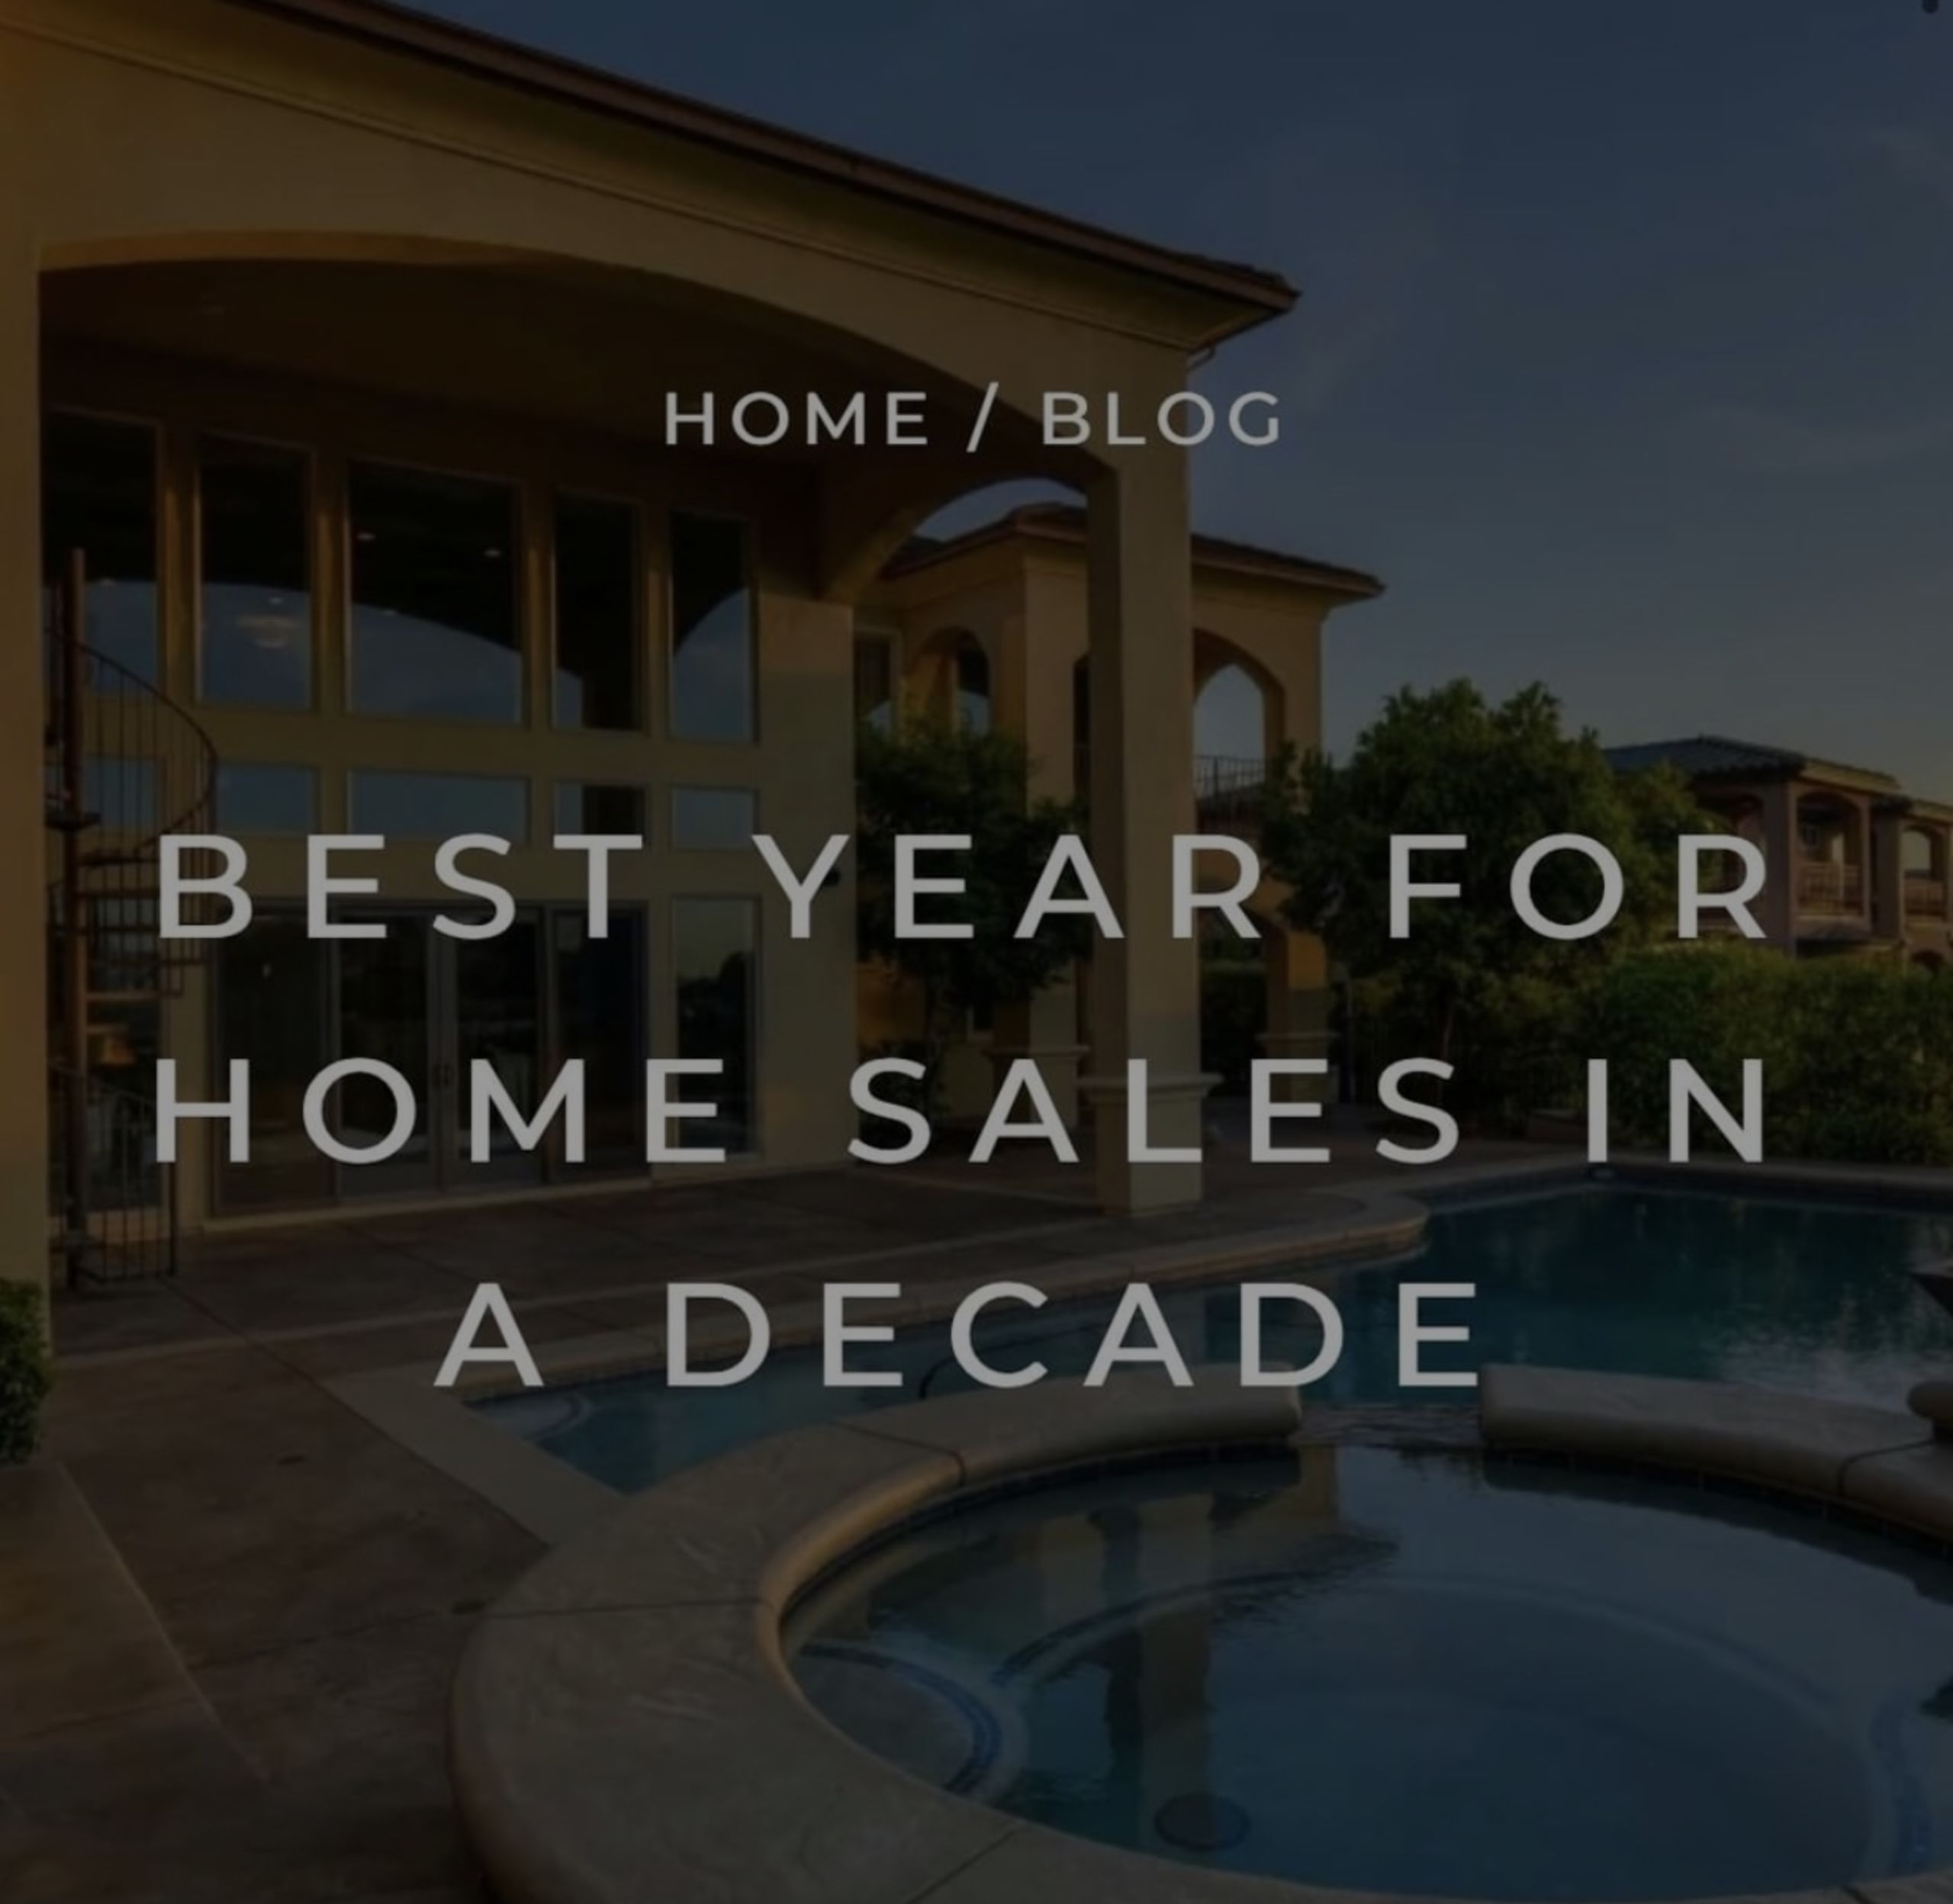 Best Year for Home Sales in a Decade